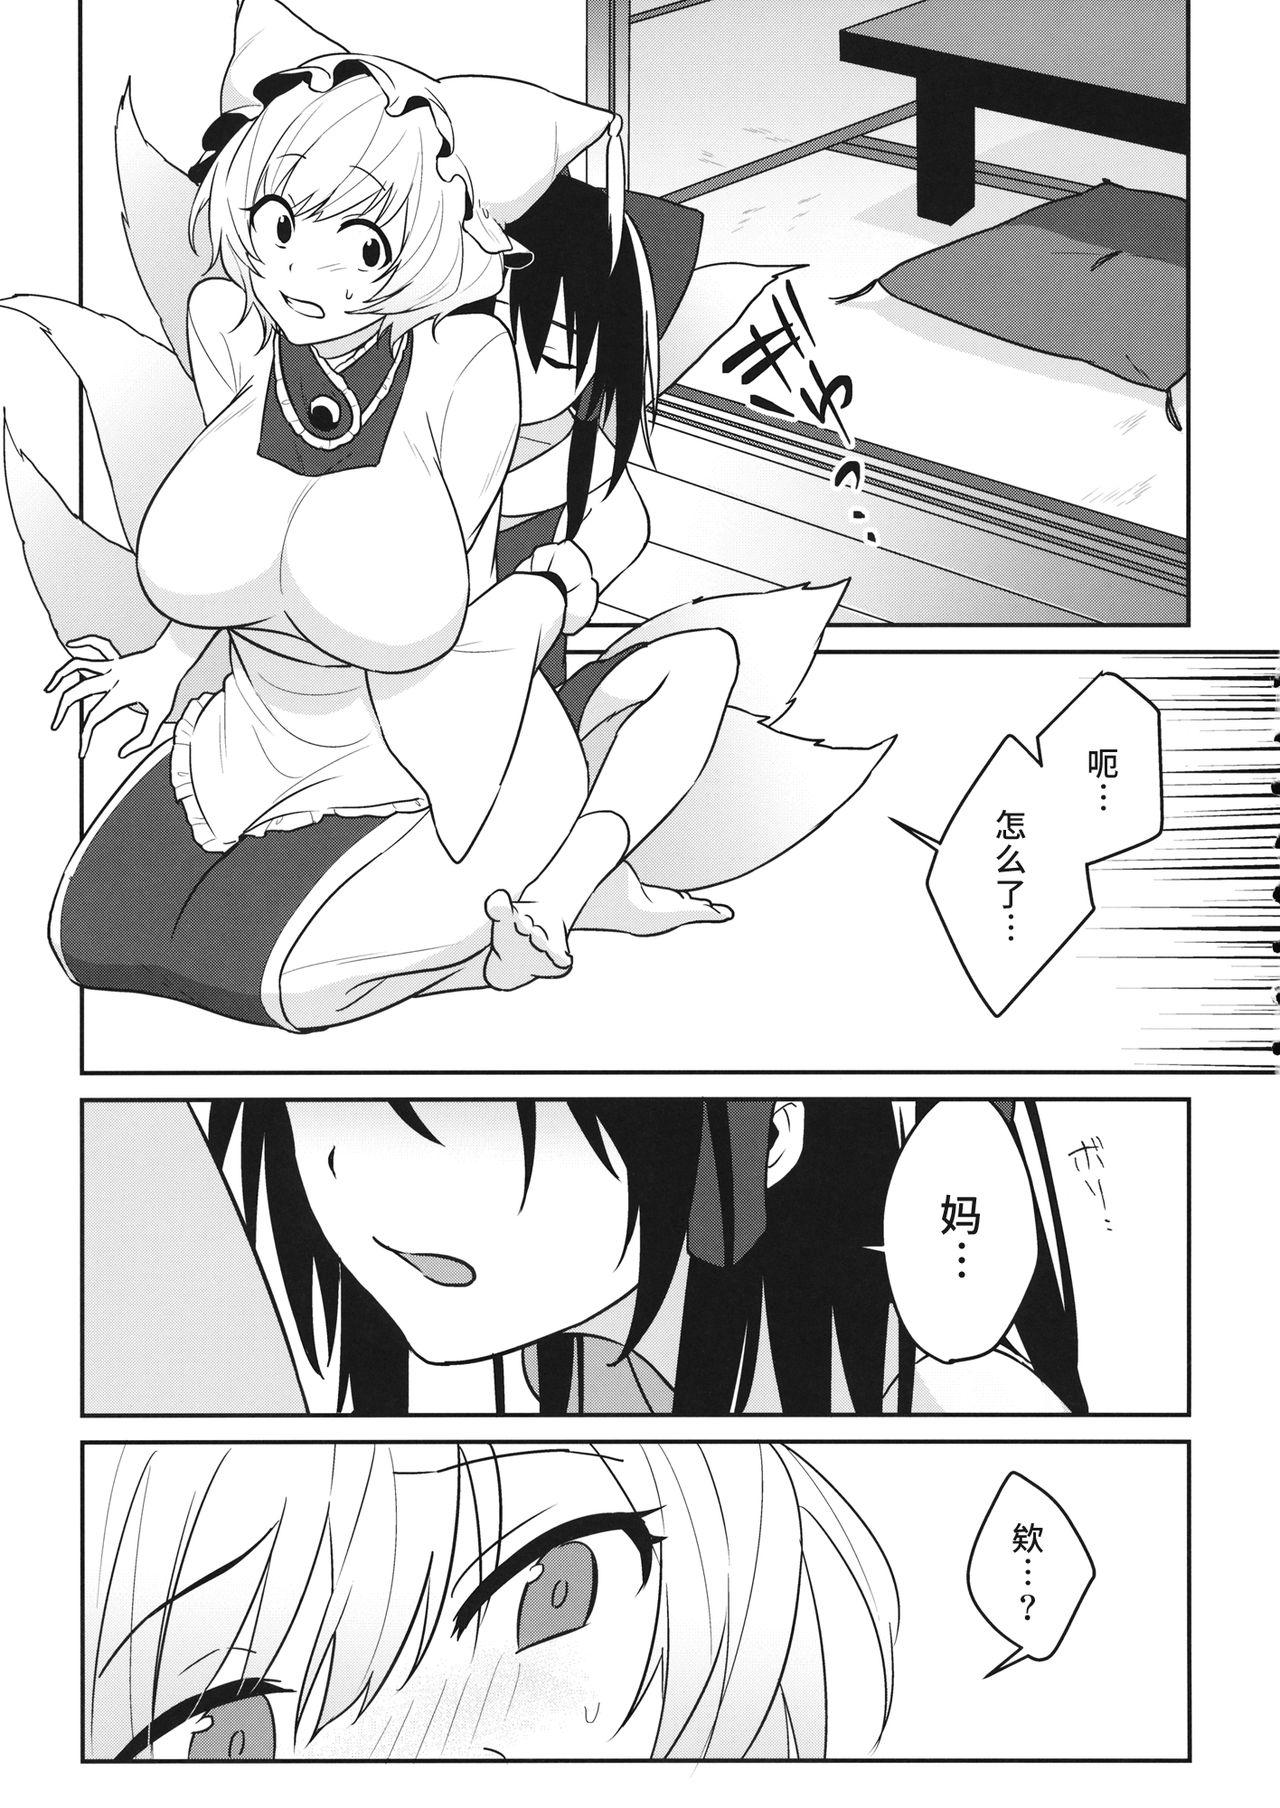 Spoon momom - Touhou project Toilet - Page 9